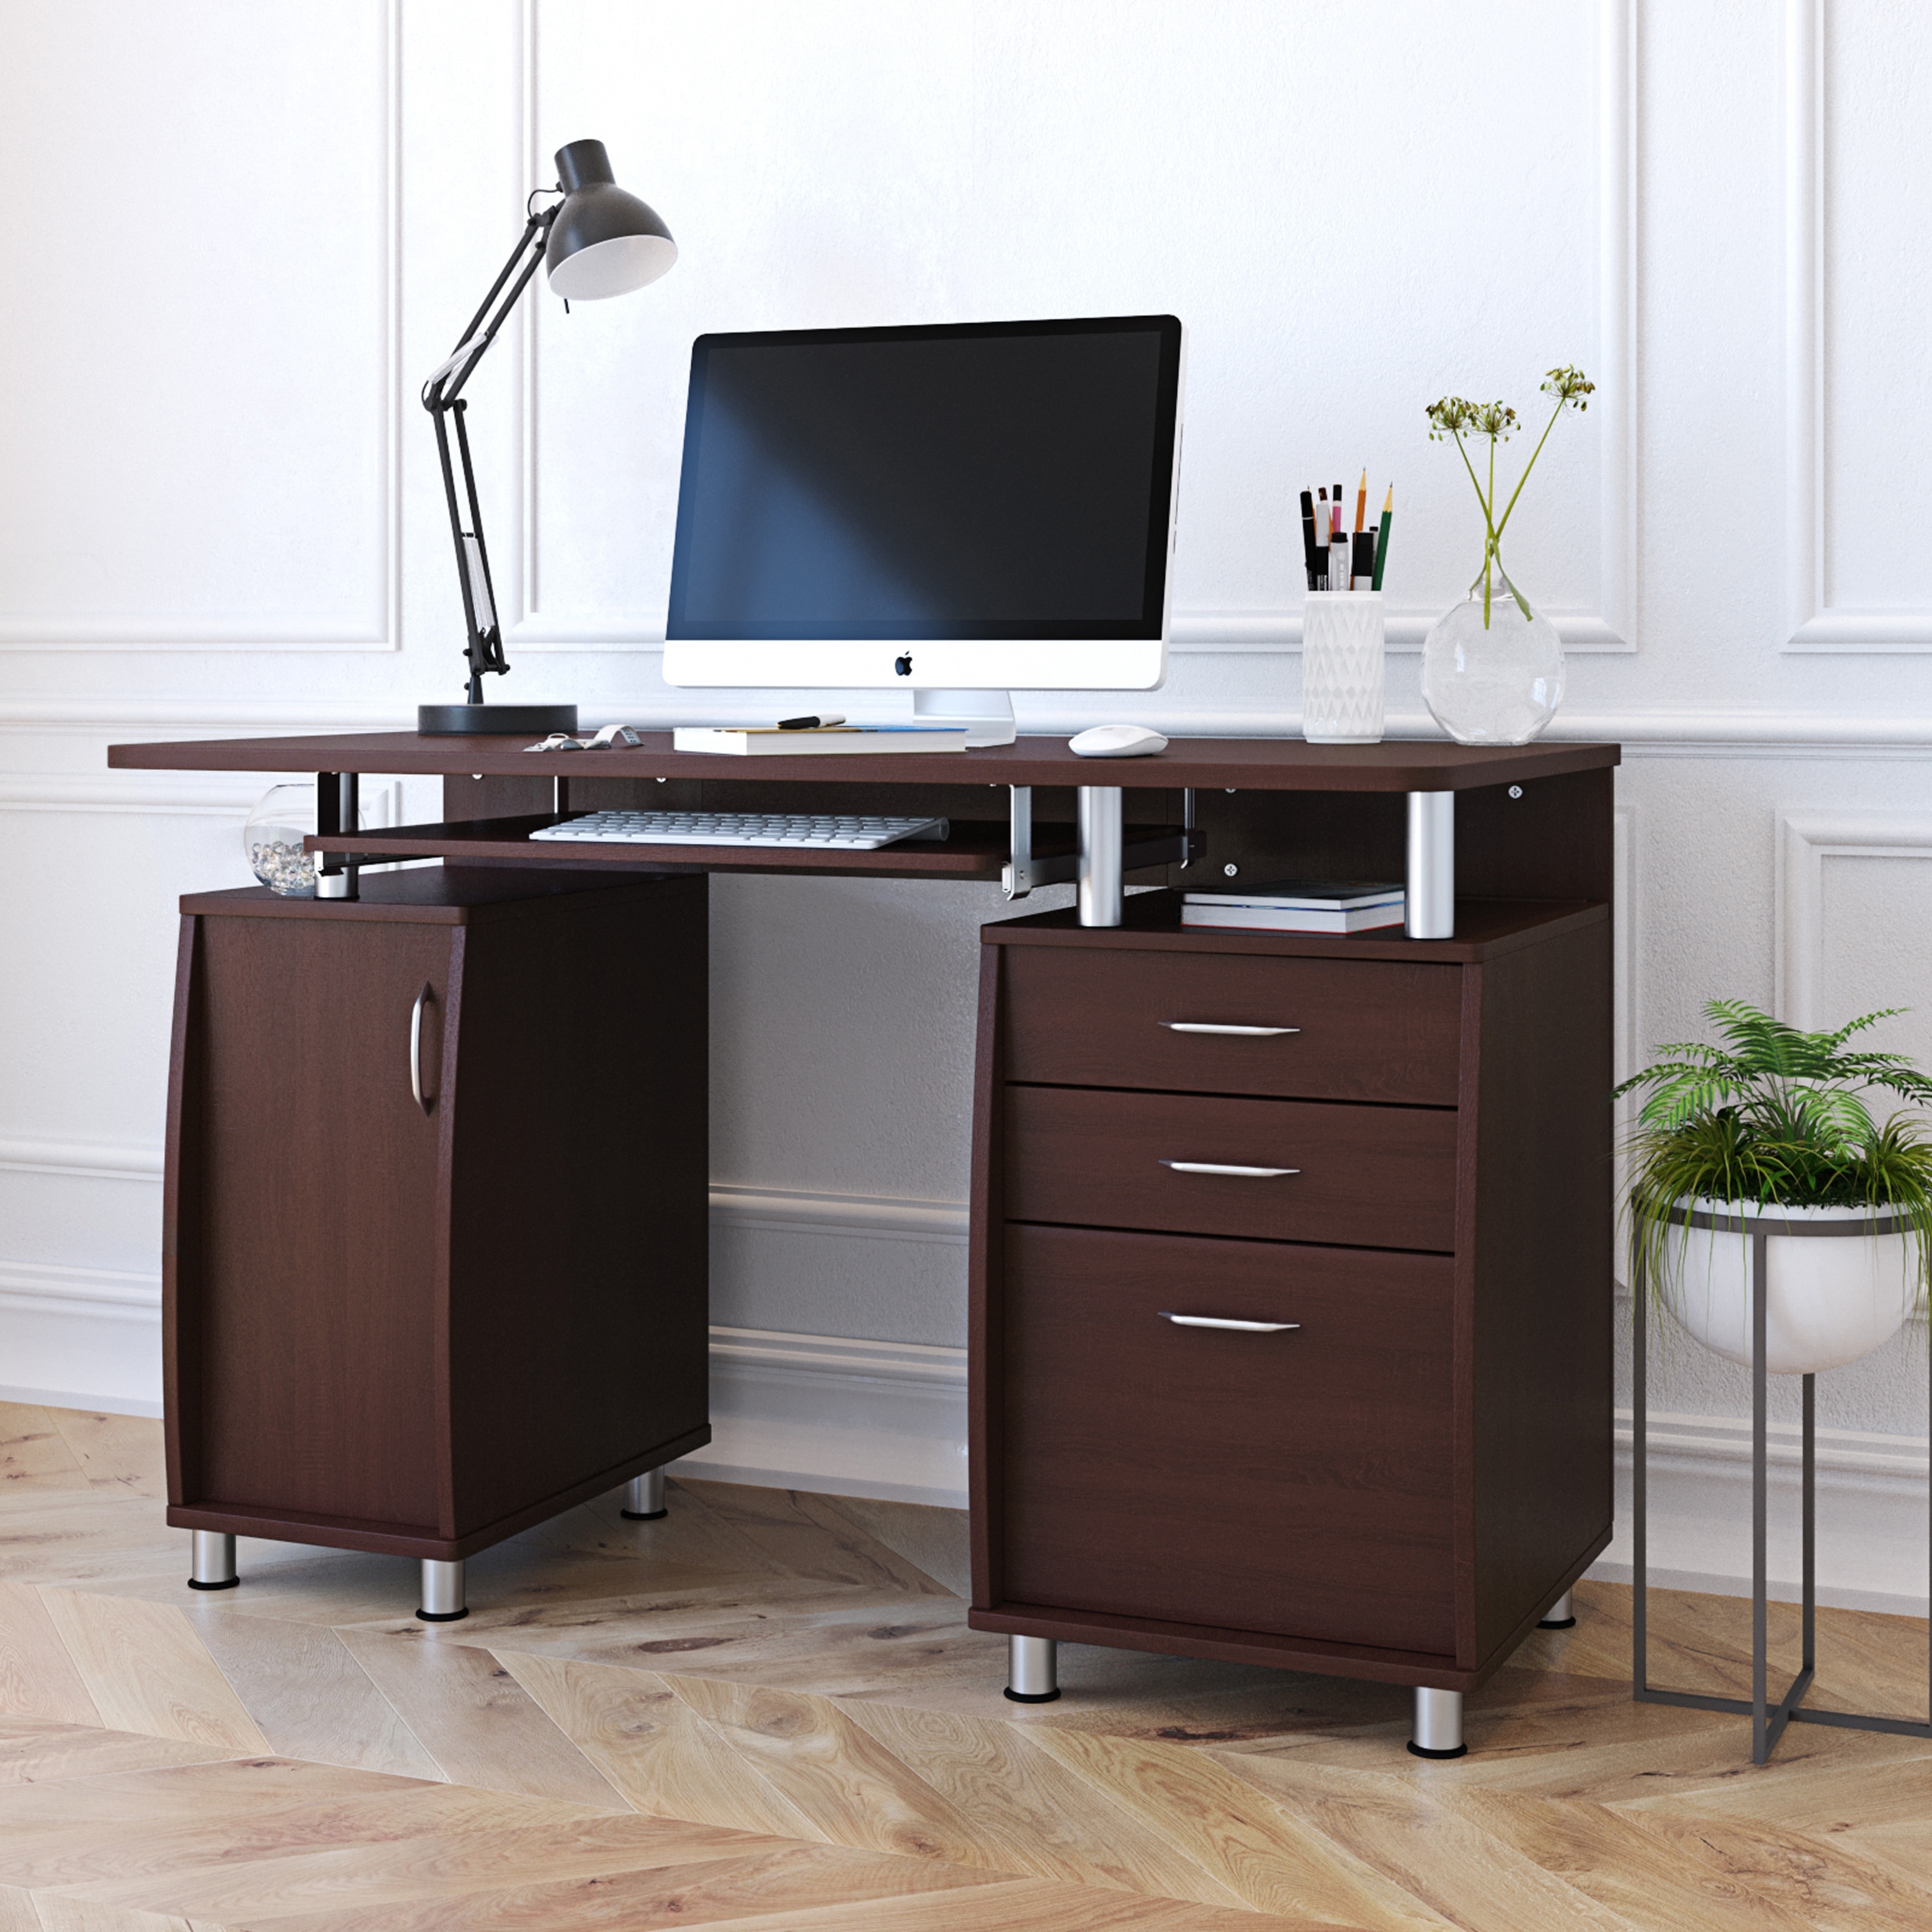 https://ak1.ostkcdn.com/images/products/is/images/direct/e03c35cf341ad2387d4a05370333390648fdb04e/Techni-Mobili-Workstation-Computer-Desk%2C-with-2-Drawers-and-a-Filing-Cabinet-with-Keyboard-Panel-and-CPU-Storage-Cabinet.jpg